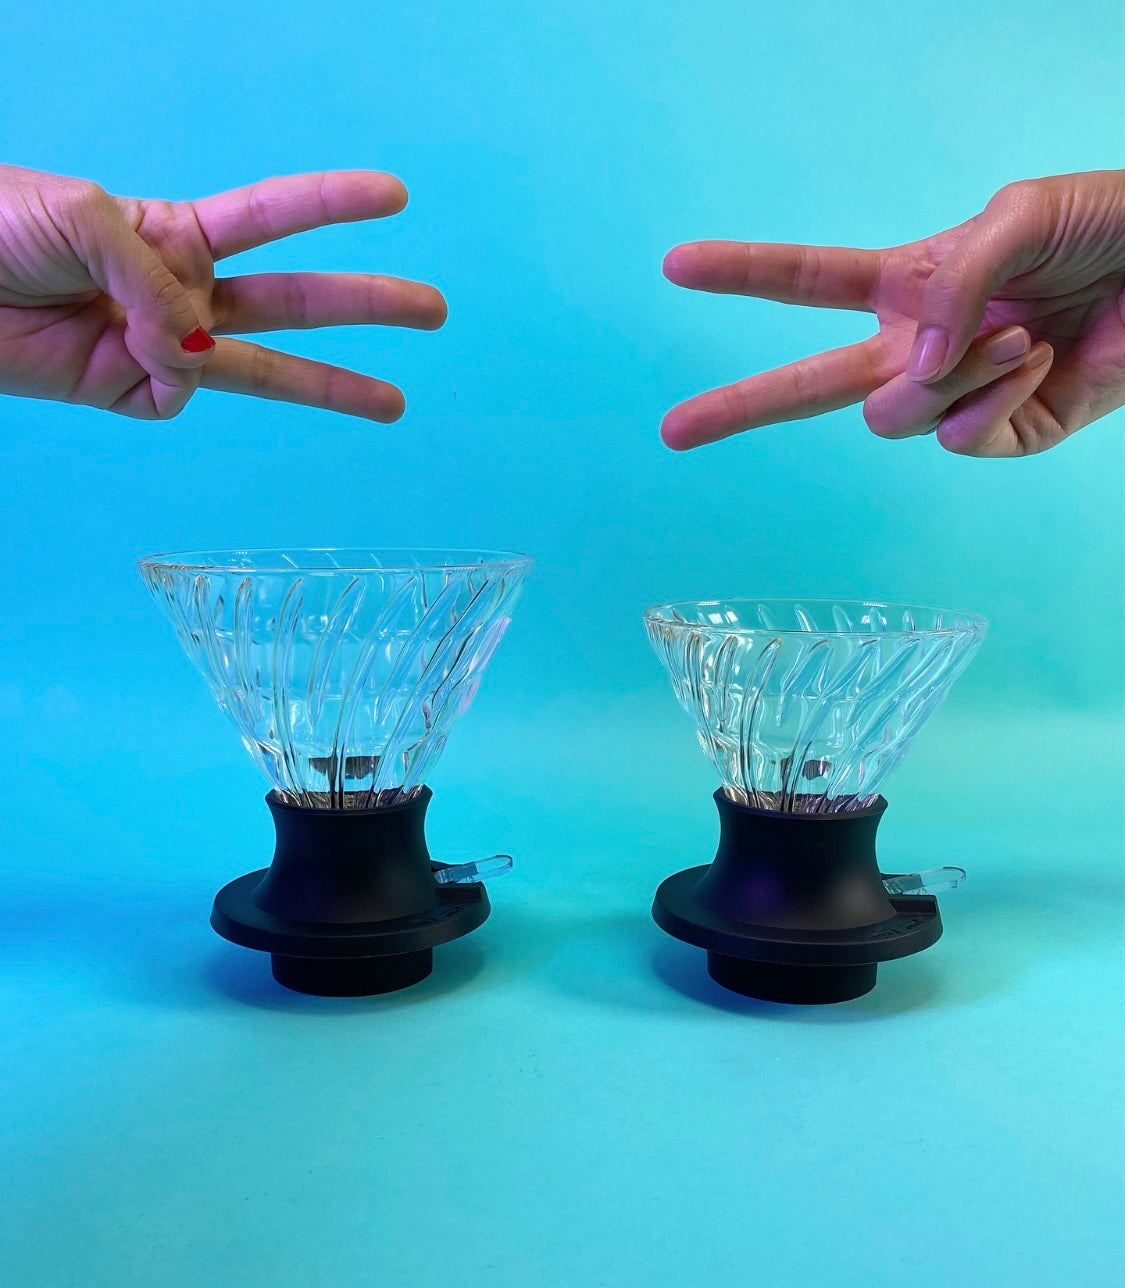 Large cone-shaped glass dripper with black silicone base with clear plastic switch, and a hand holding three fingers above to indicate size,  next to a medium cone-shaped glass dripper with black silicone base with clear plastic switch, and a hand holding two fingers above to indicate size, on a light blue background.